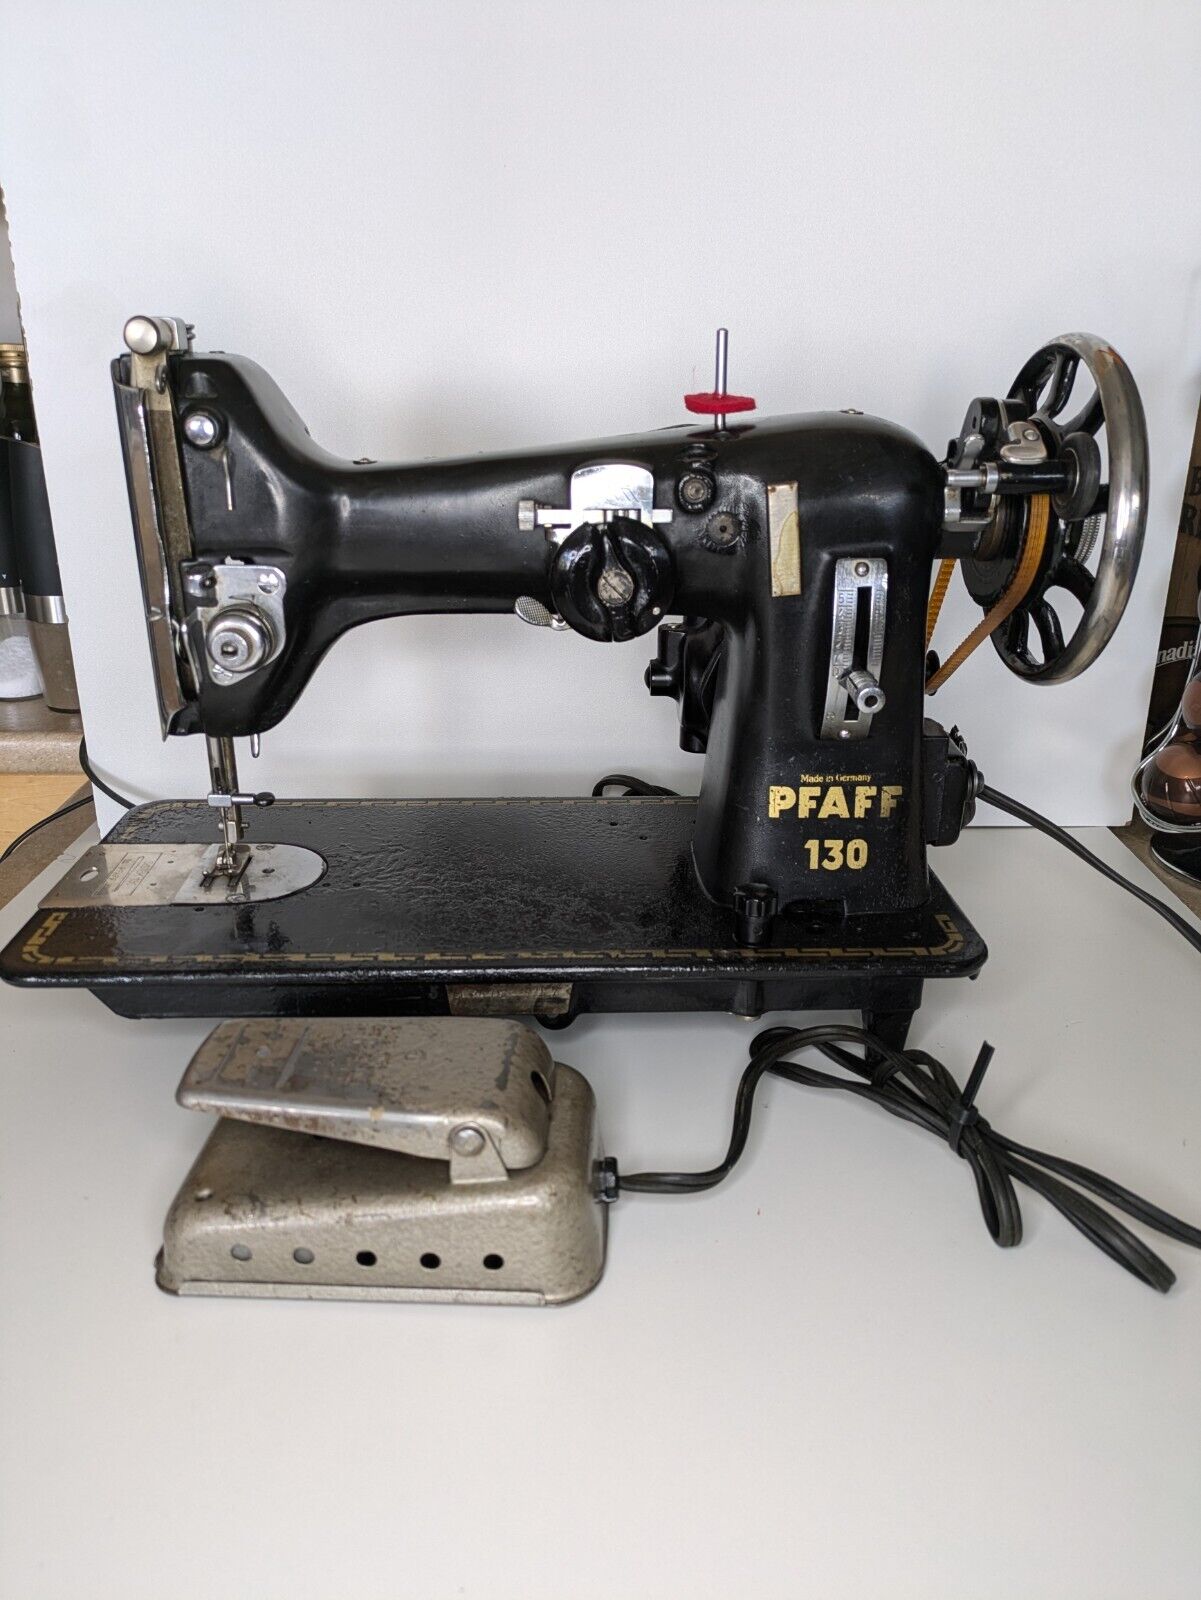 Vintage Pfaff Sewing Machine Made in Germany With New Belt-Runs Great